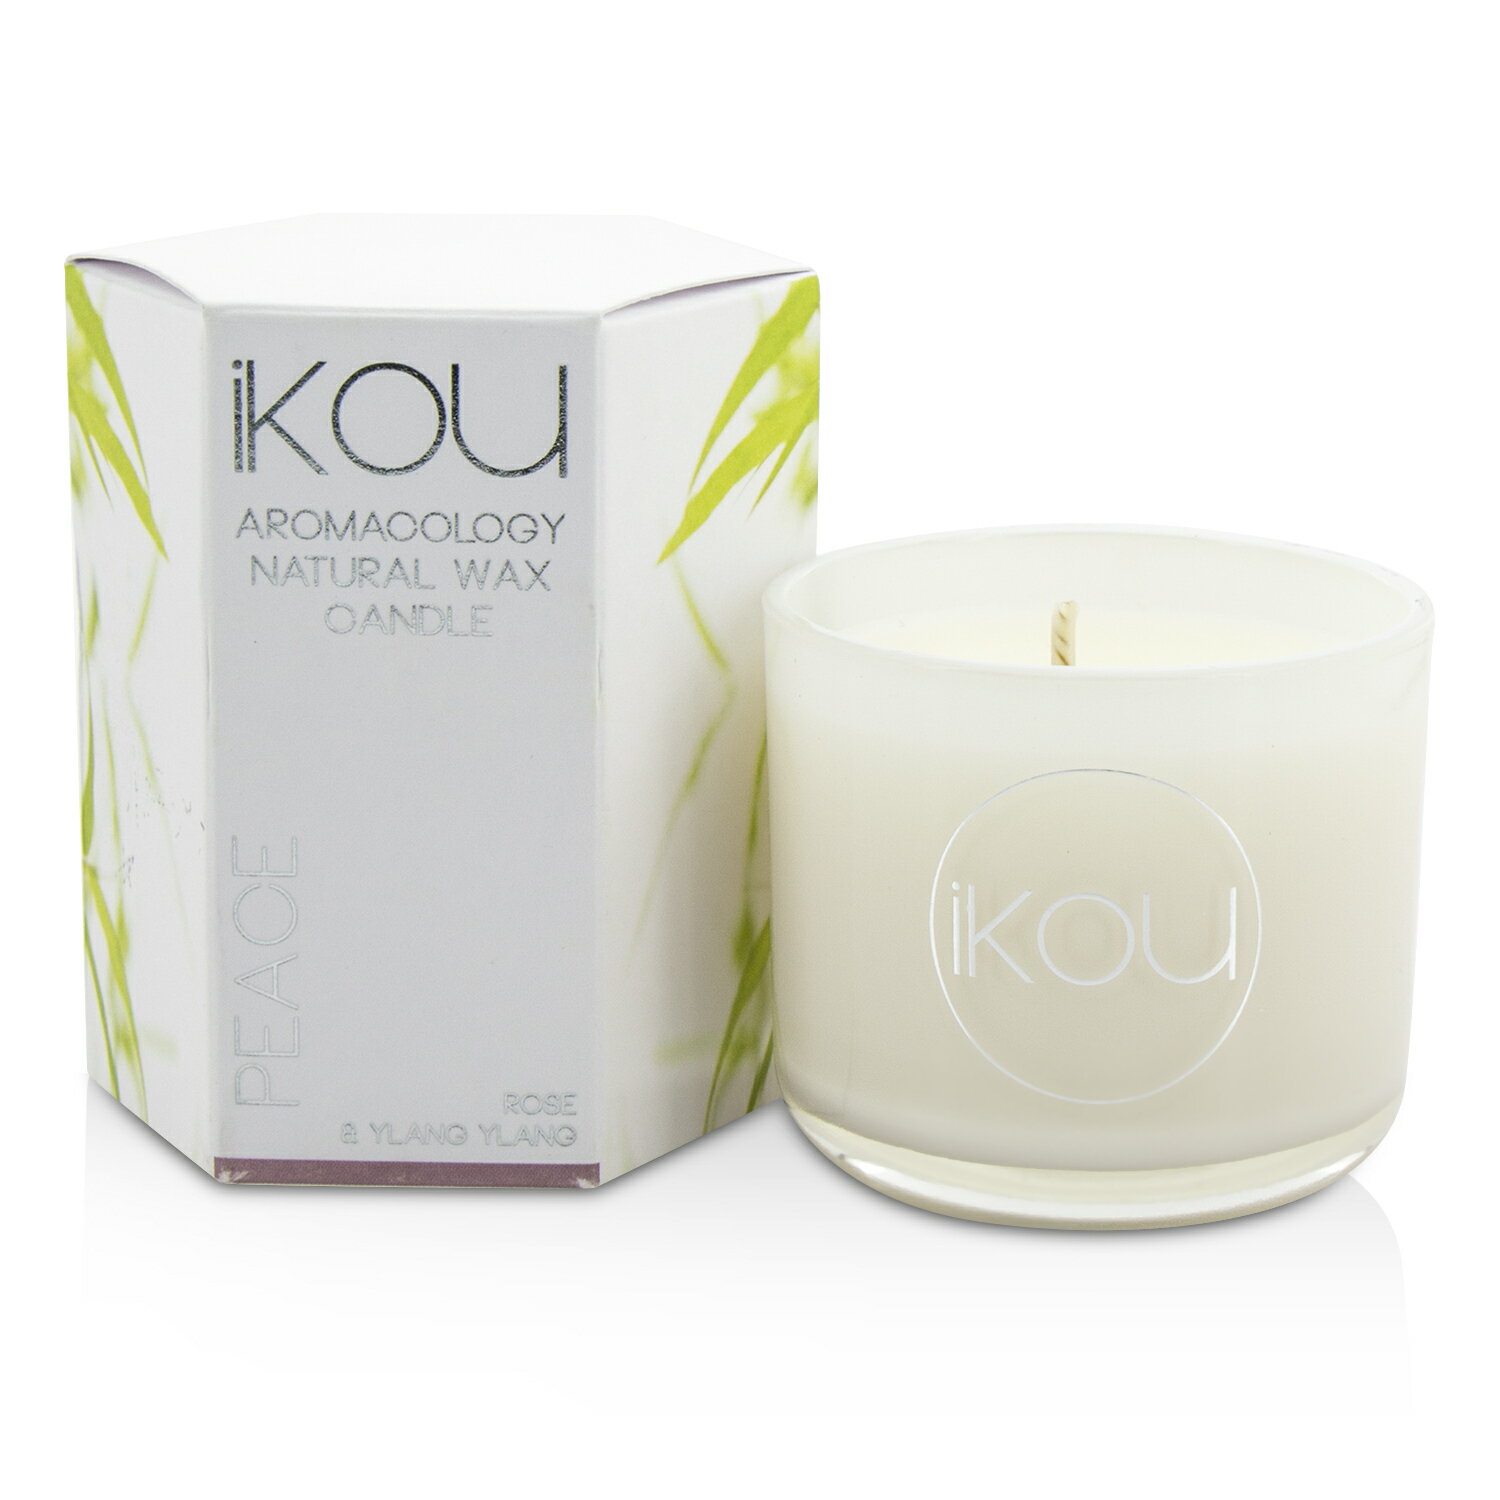 iKOU - Aromacology天然蠟蠟燭 - 和平 (玫瑰&依蘭)Eco-Luxury Aromacology Natural Wax Candle Glass - Peace (Rose & Ylang Ylang)